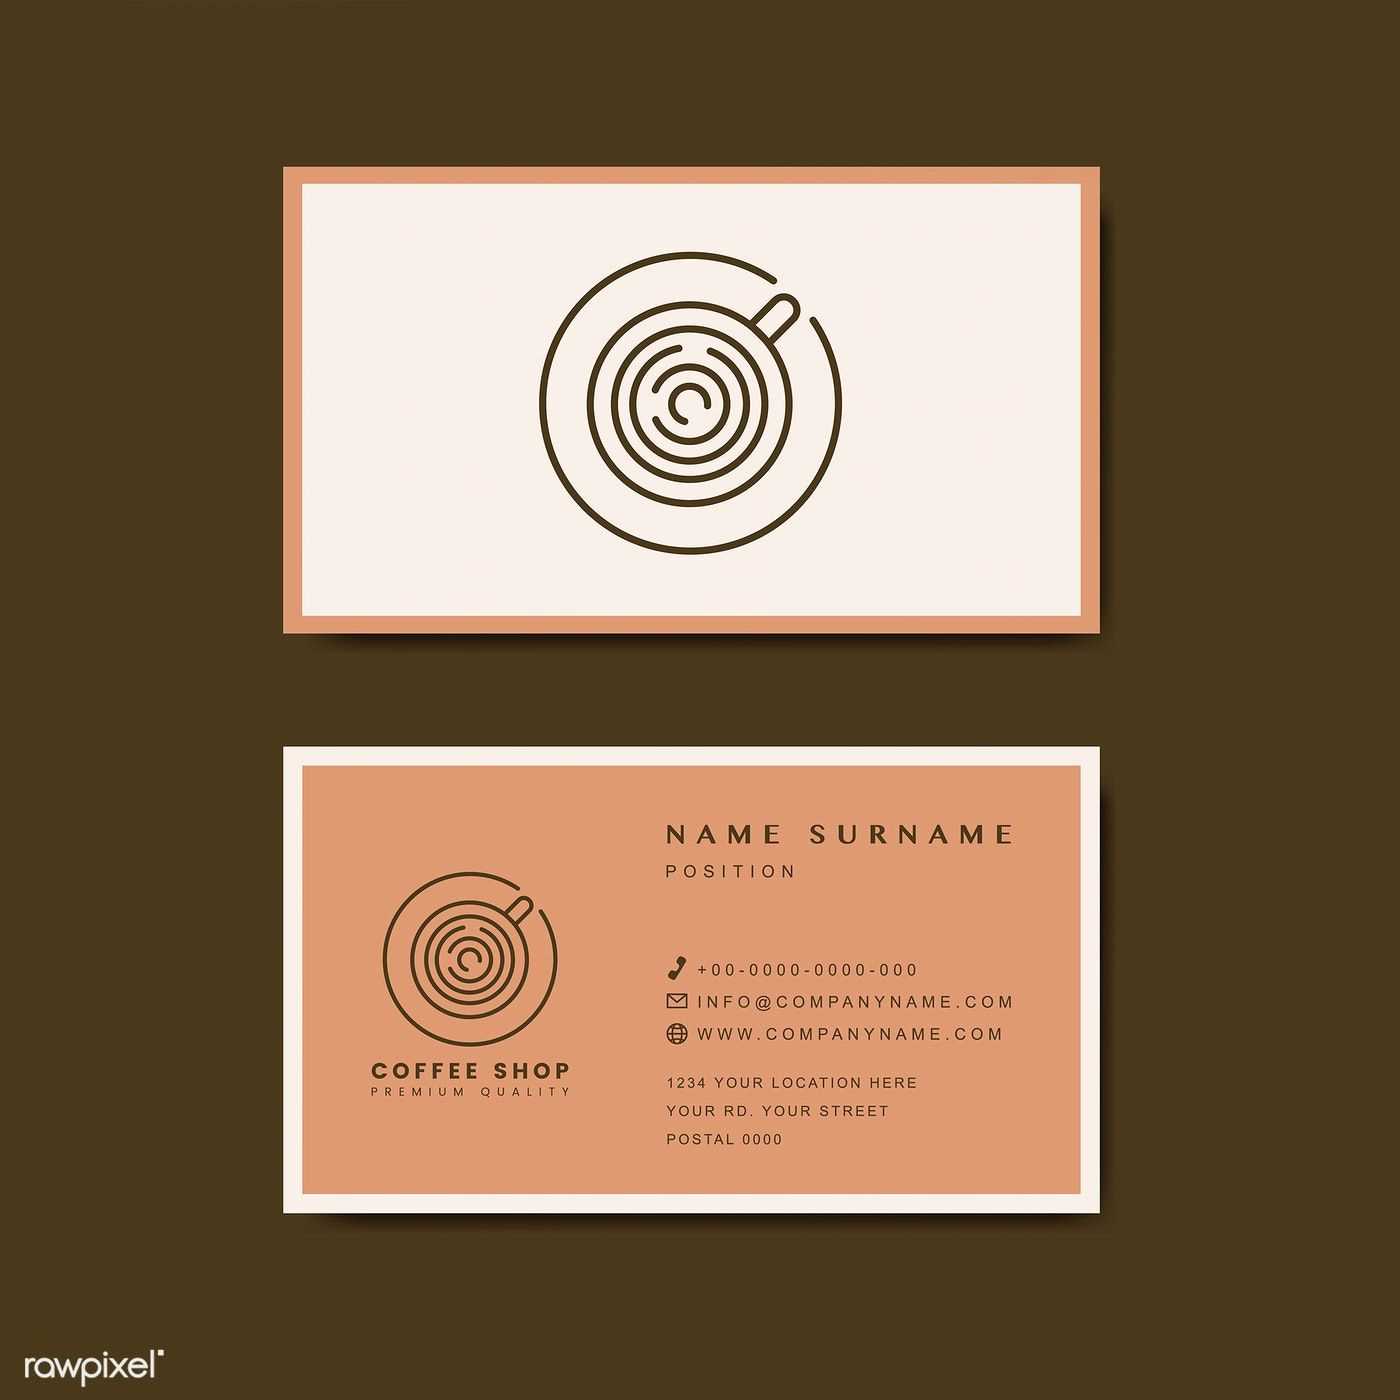 Coffee Shop Business Card Template Vector | Free Image With Coffee Business Card Template Free